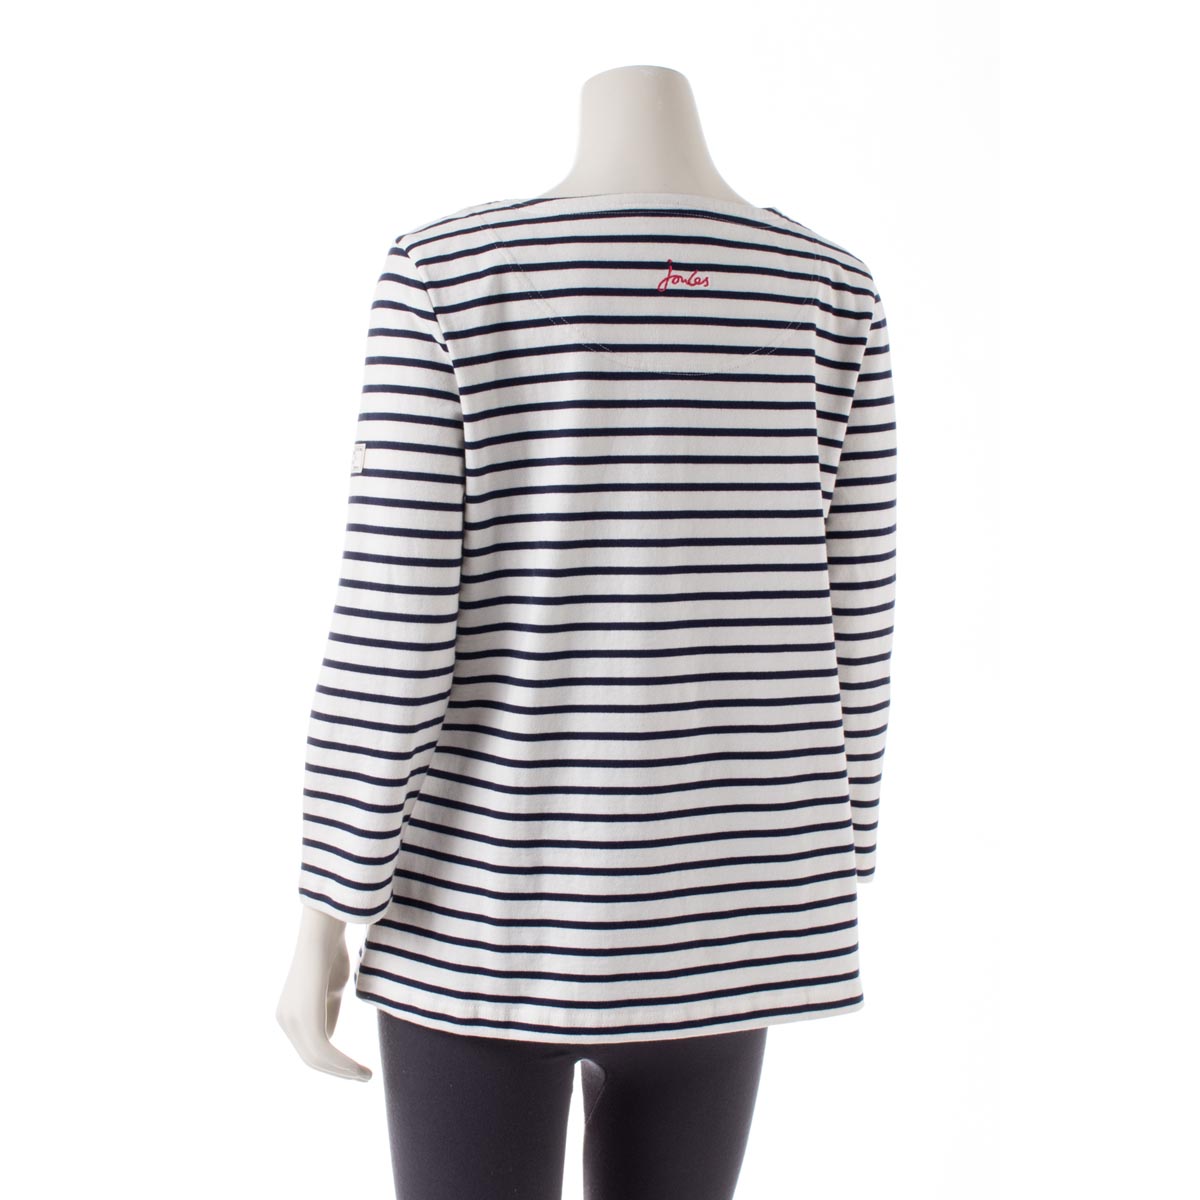 Joules Women's Harbour Top discontinued